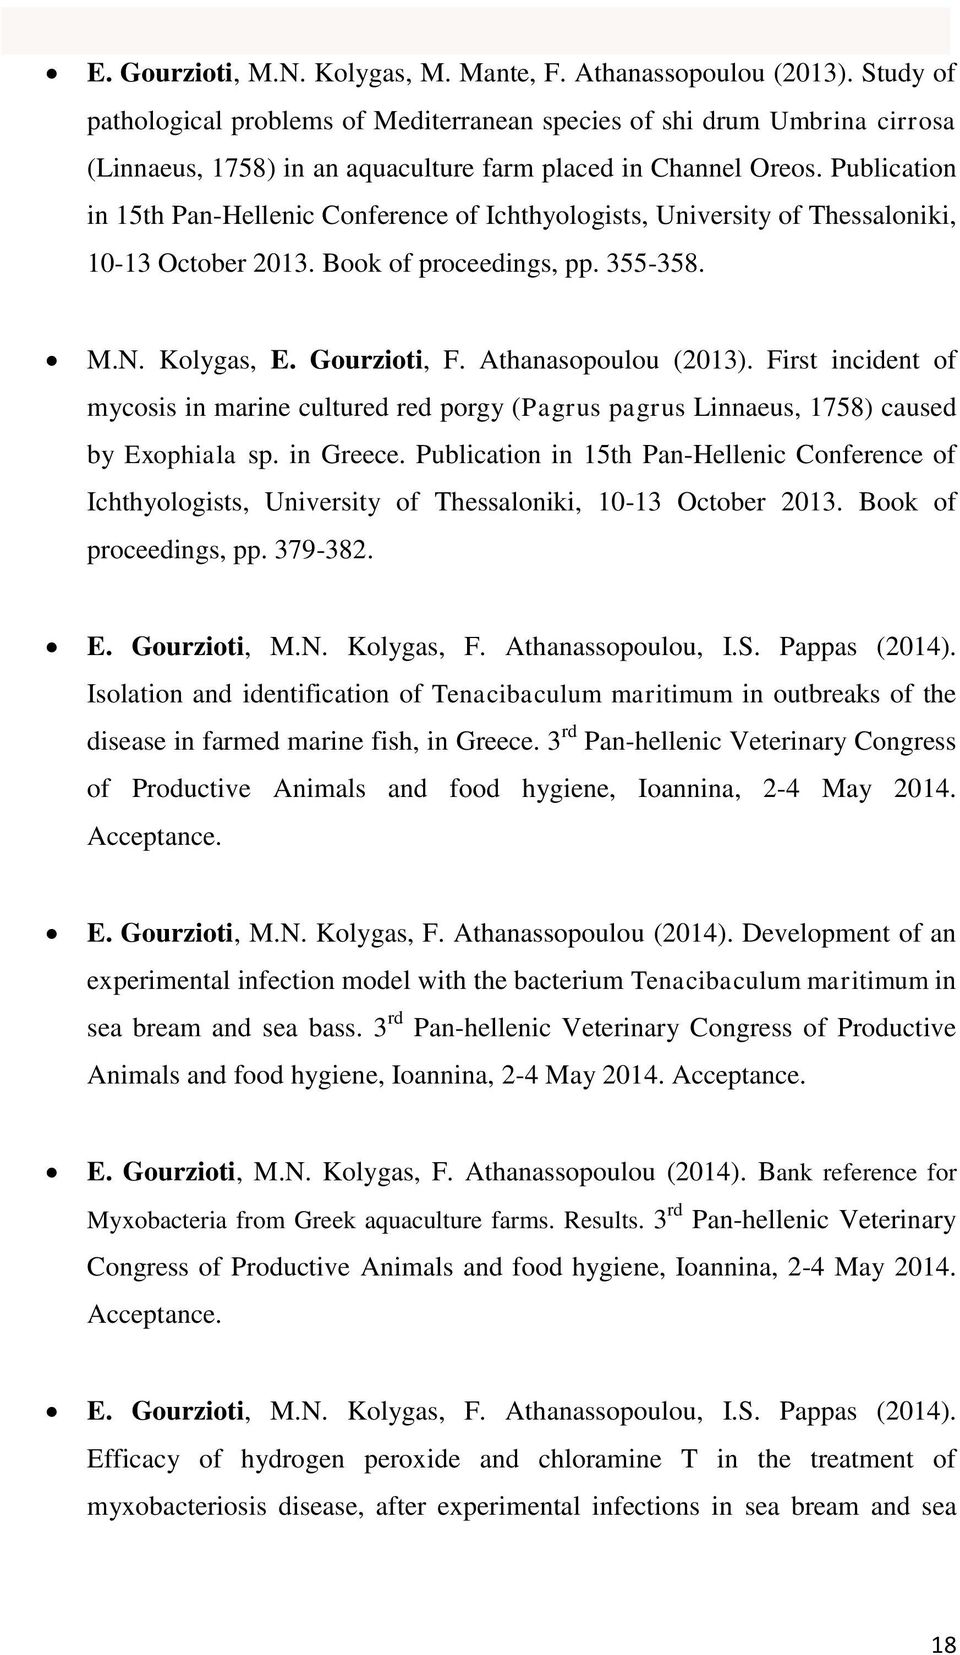 Publication in 15th Pan-Hellenic Conference of Ichthyologists, University of Thessaloniki, 10-13 October 2013. Book of proceedings, pp. 355-358. M.N. Kolygas, E. Gourzioti, F. Athanasopoulou (2013).